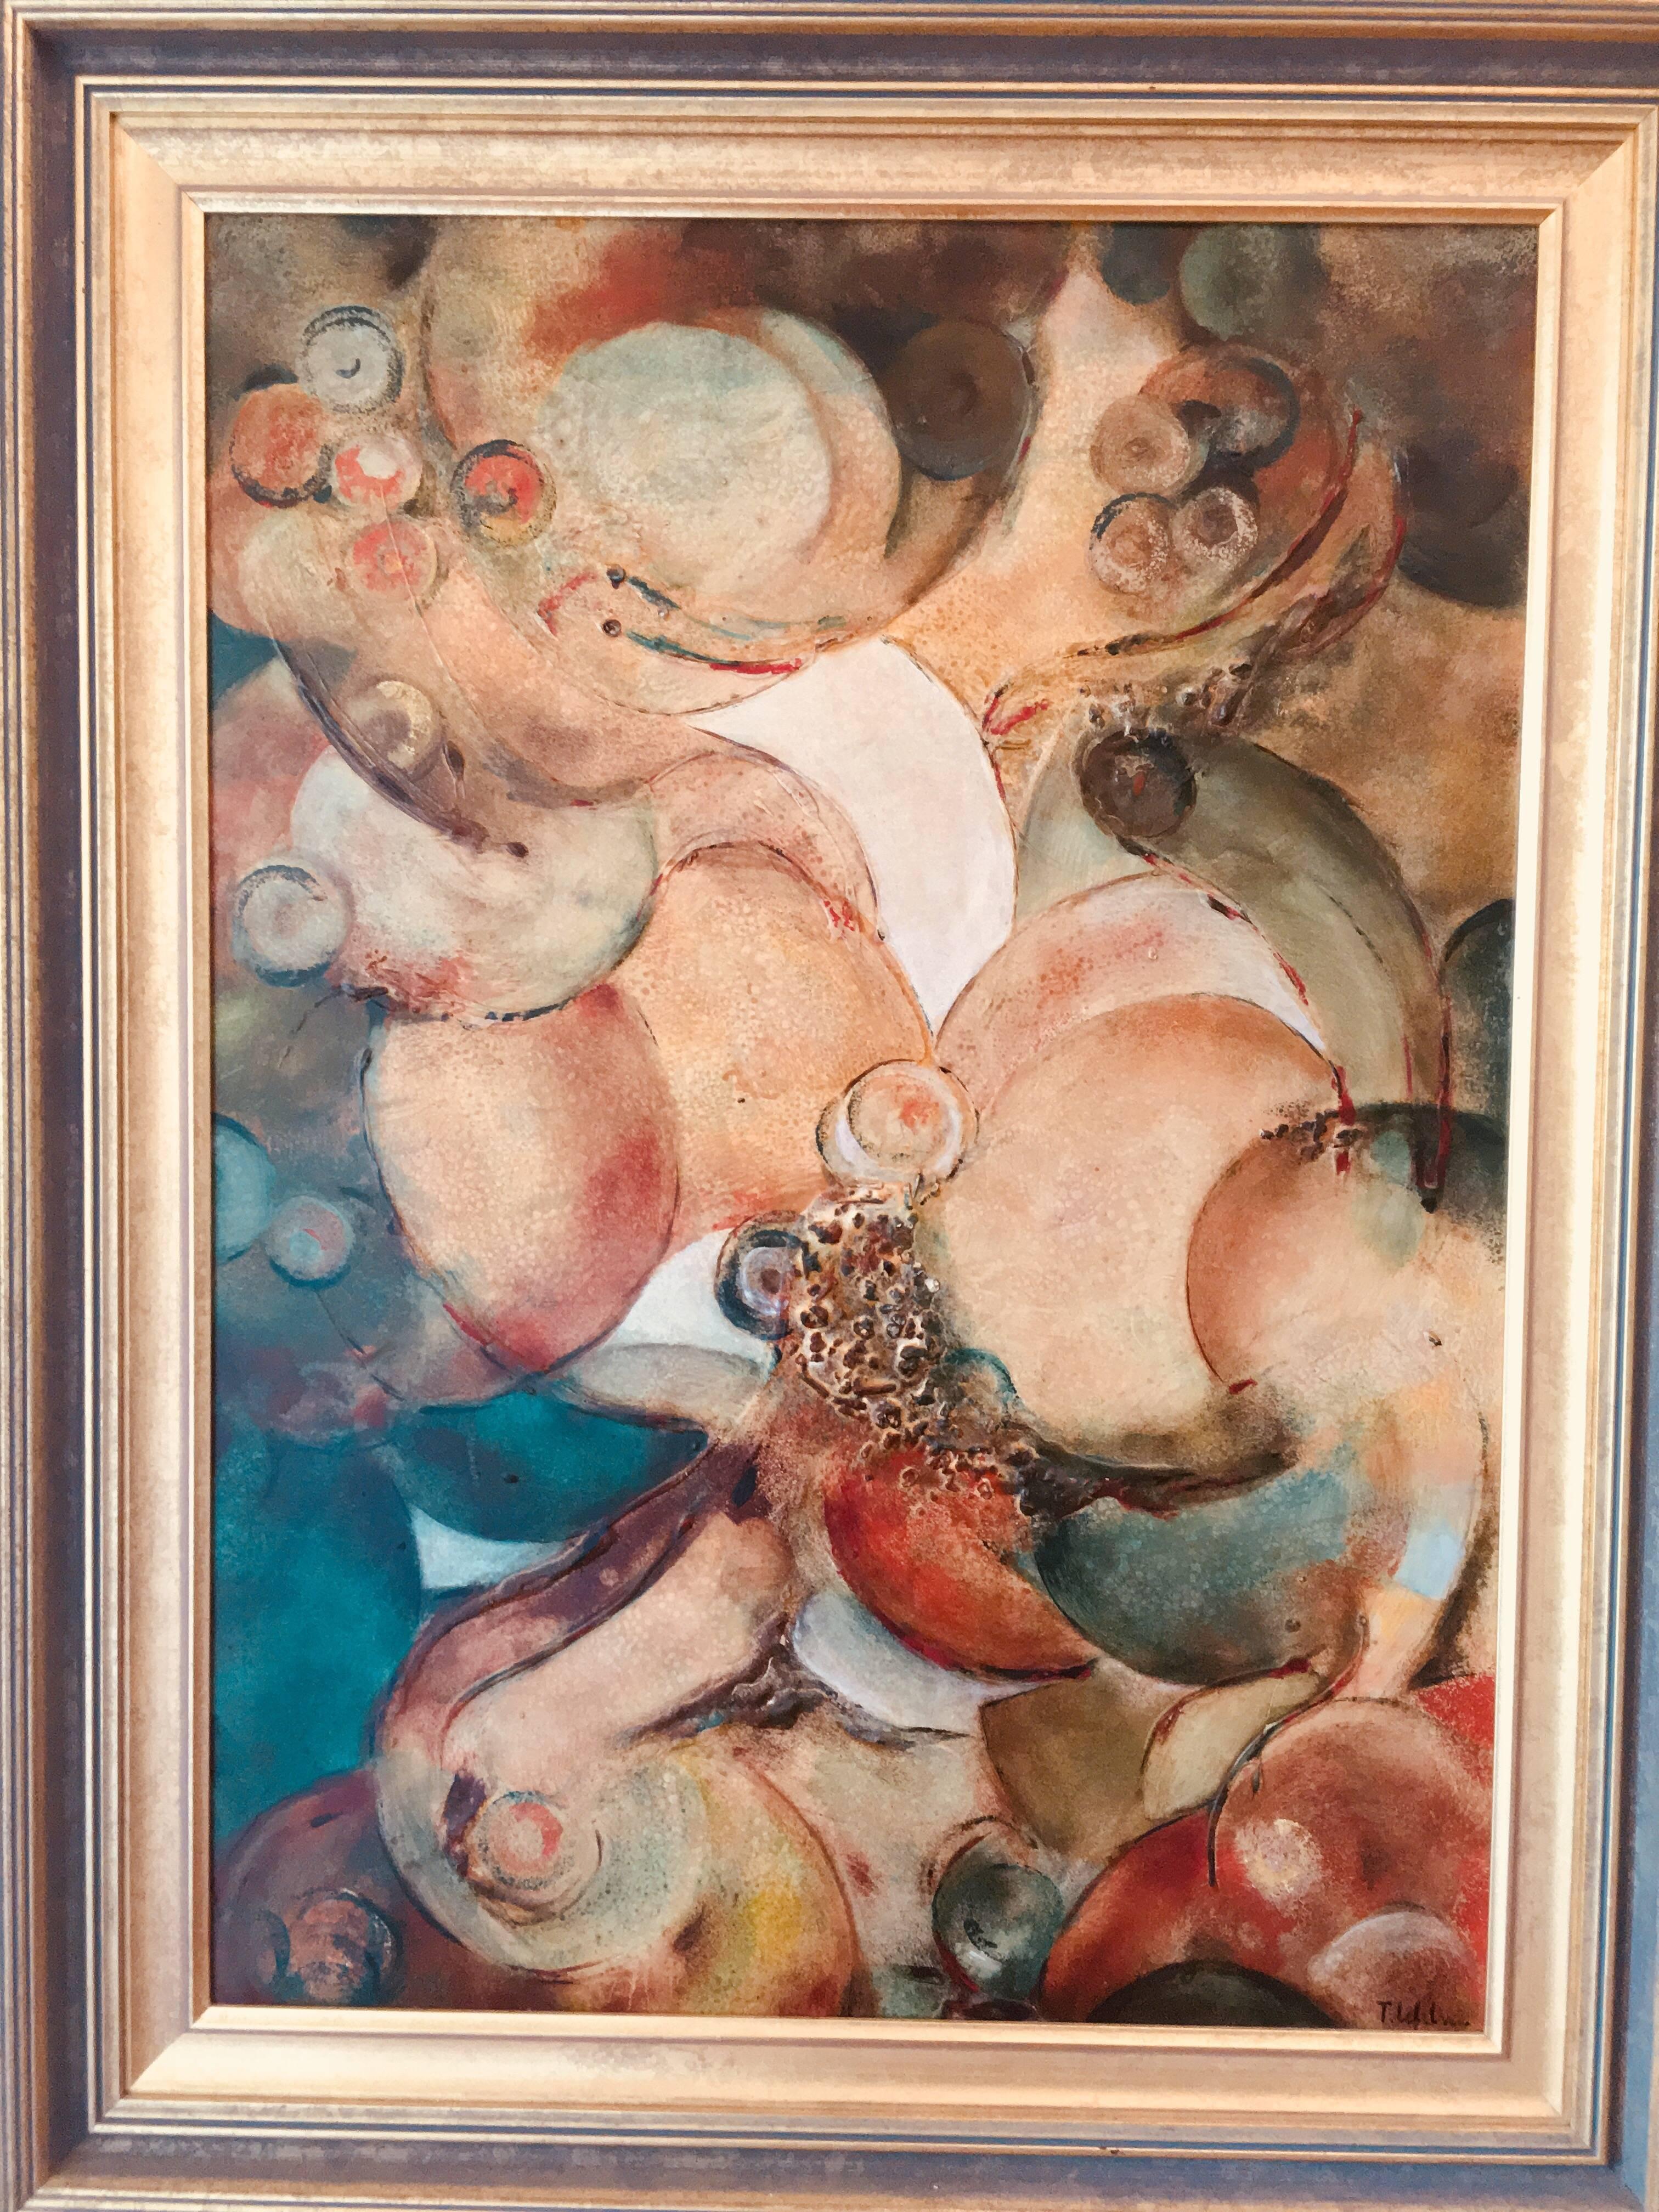 Abstract oil on board by T Lefeline. Framed and in excellent original order.